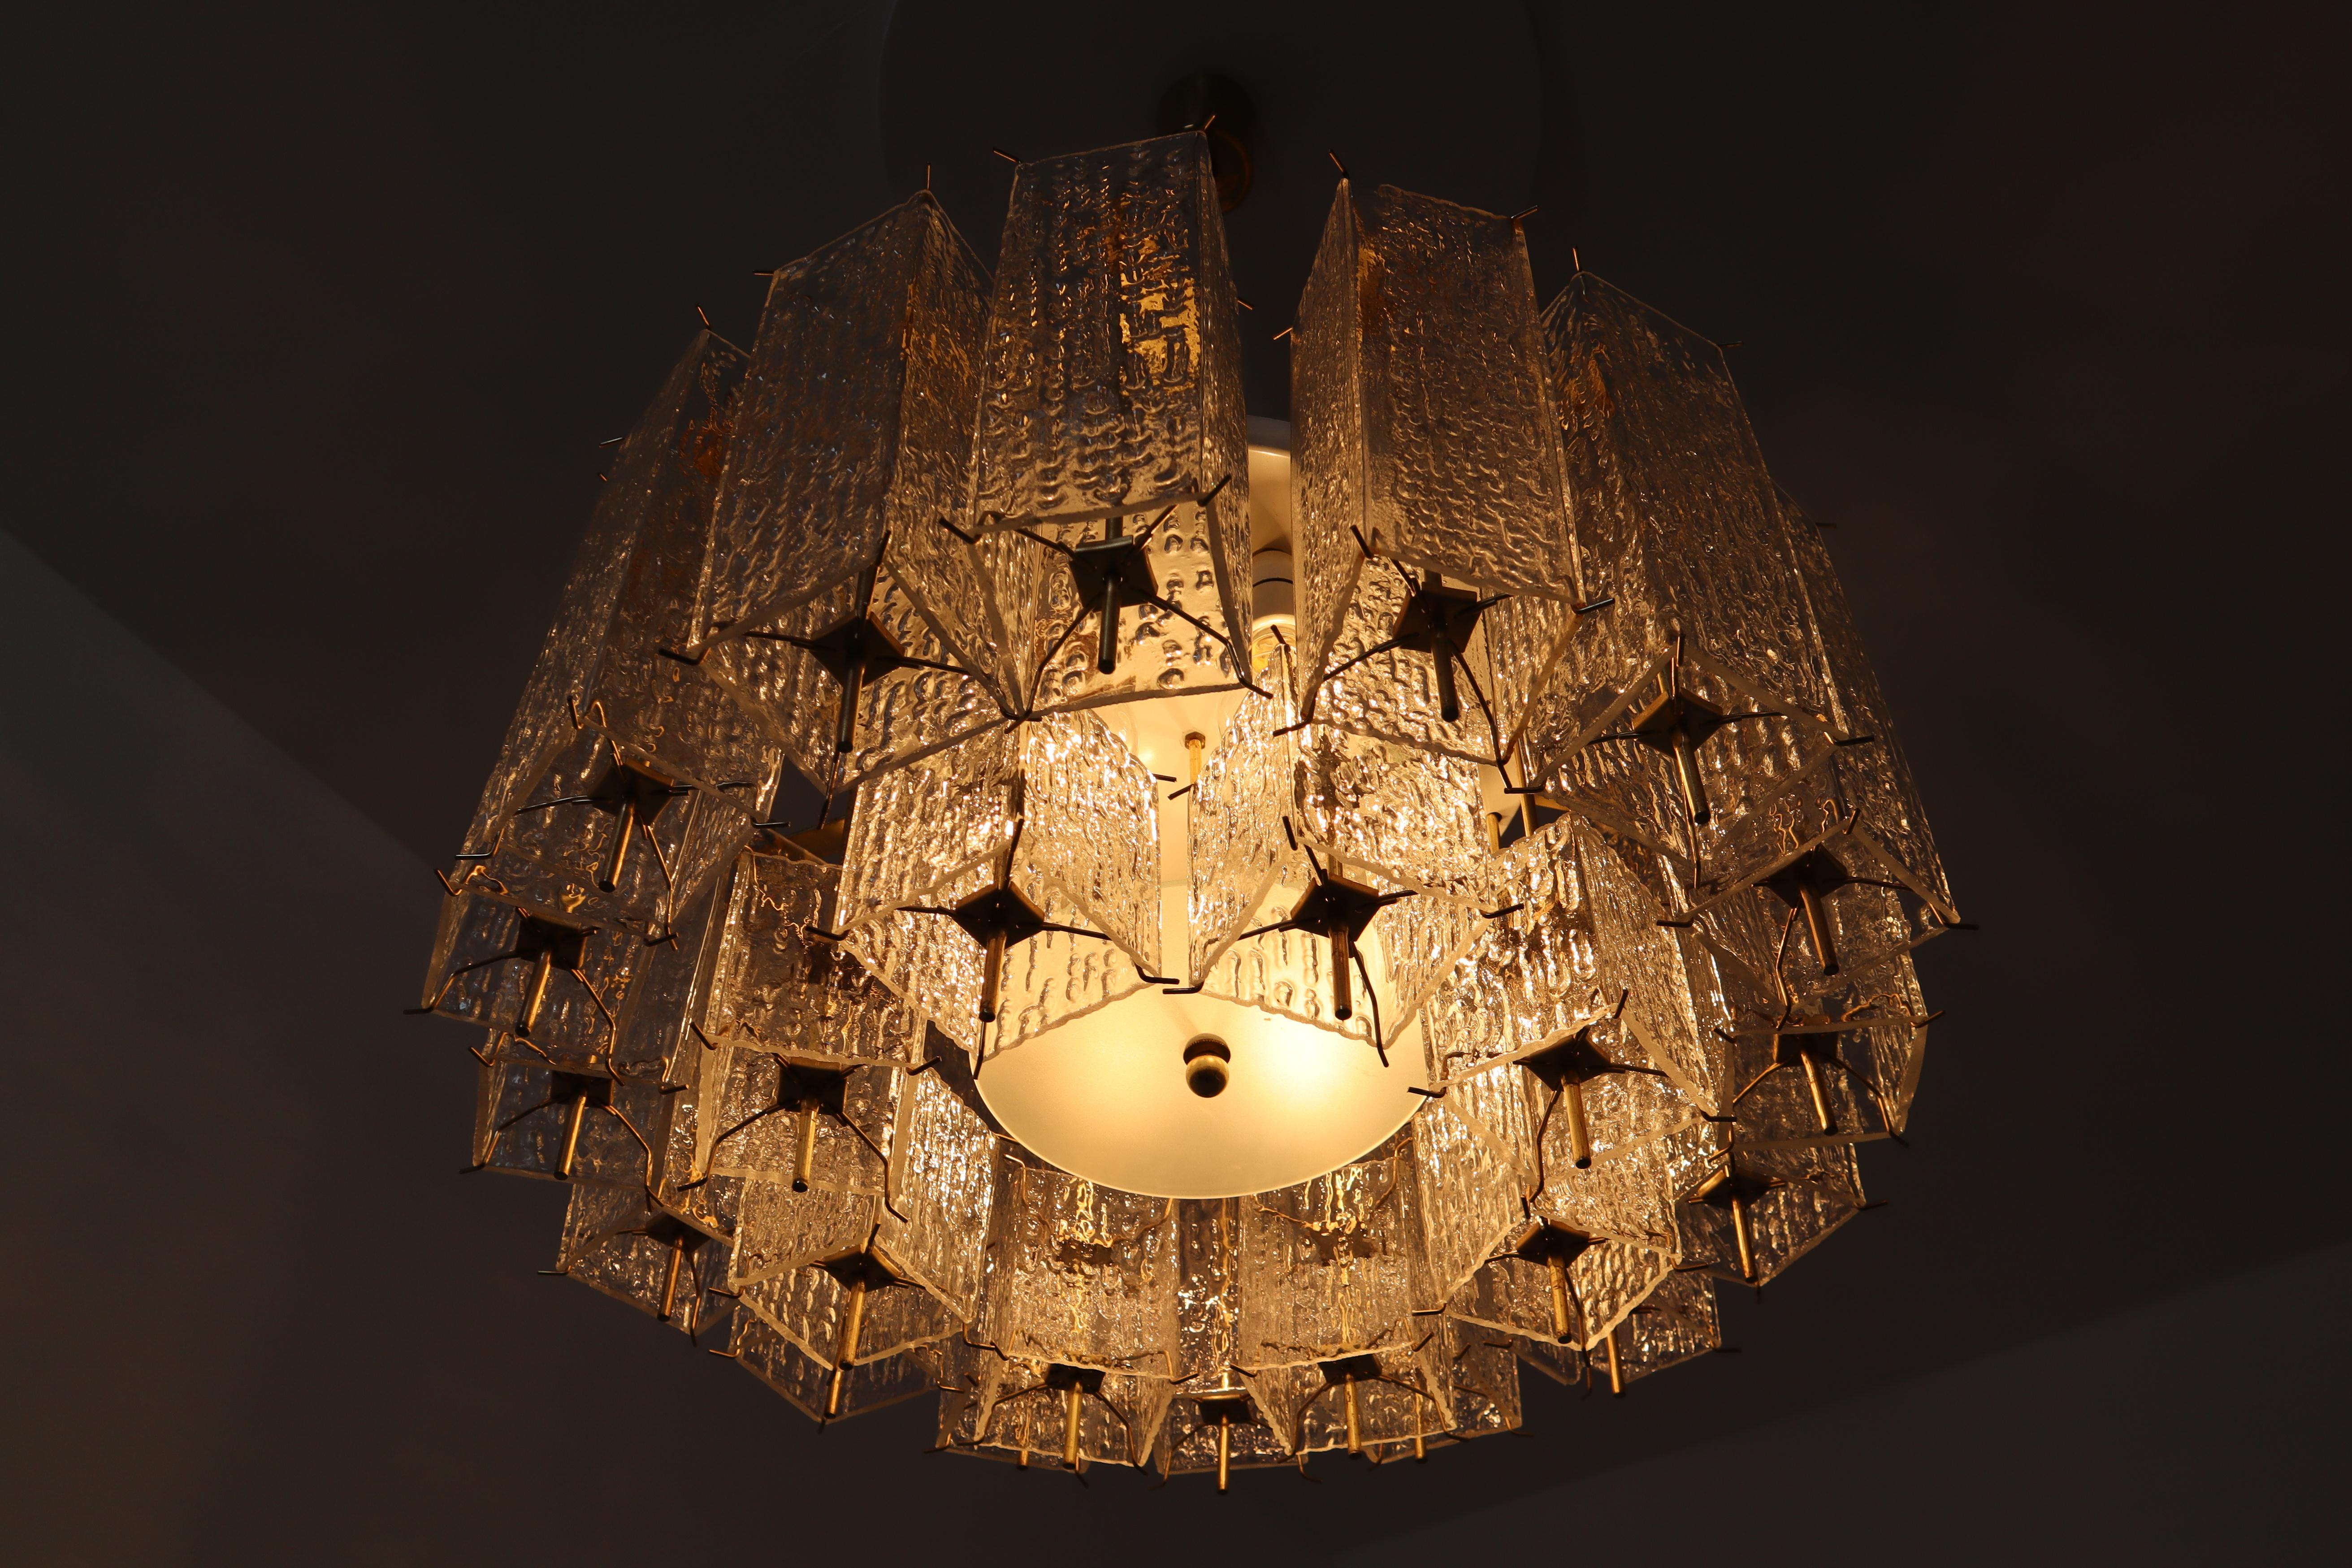 Large Midcentury Chandelier with Ice Glass Tubes in Brass Fixture Europe, 1960s For Sale 1